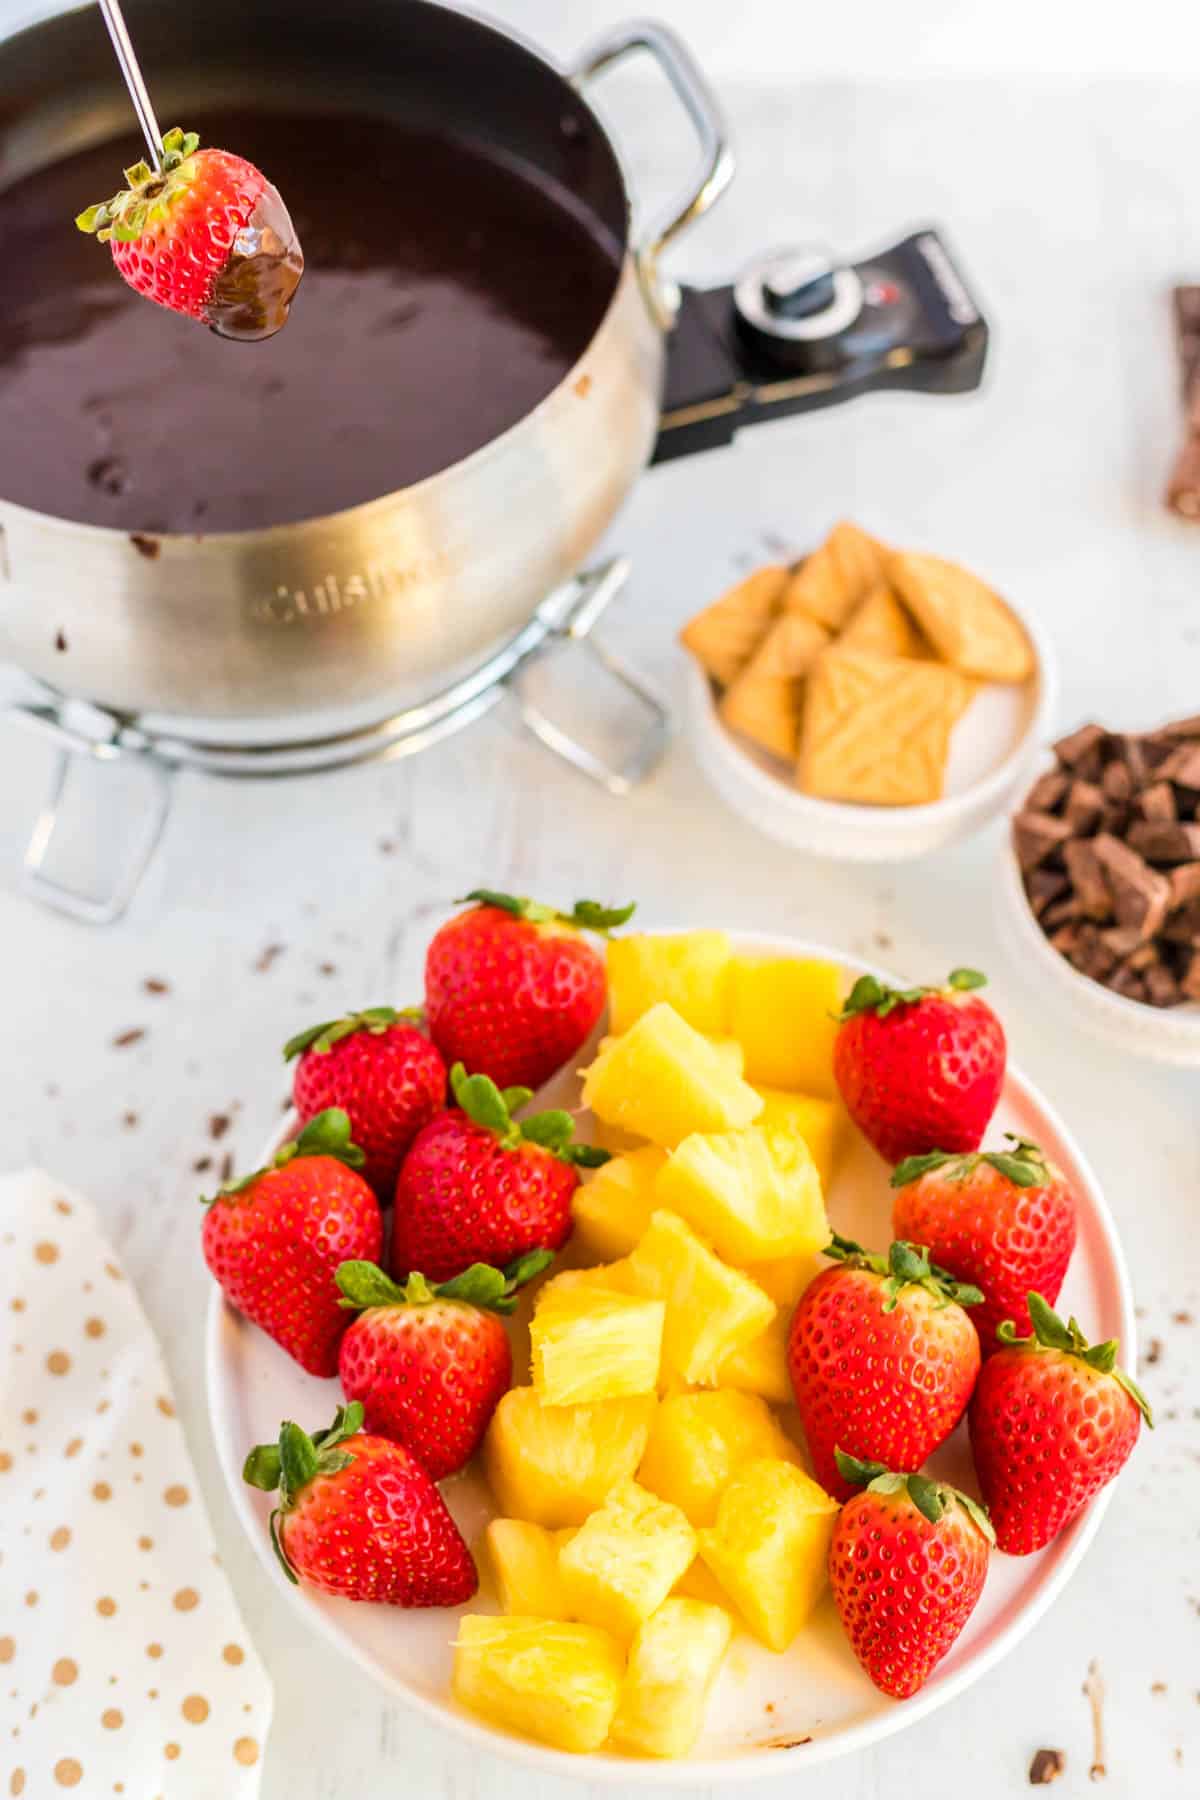 The finished Chocolate Fondue with dippers all around it.